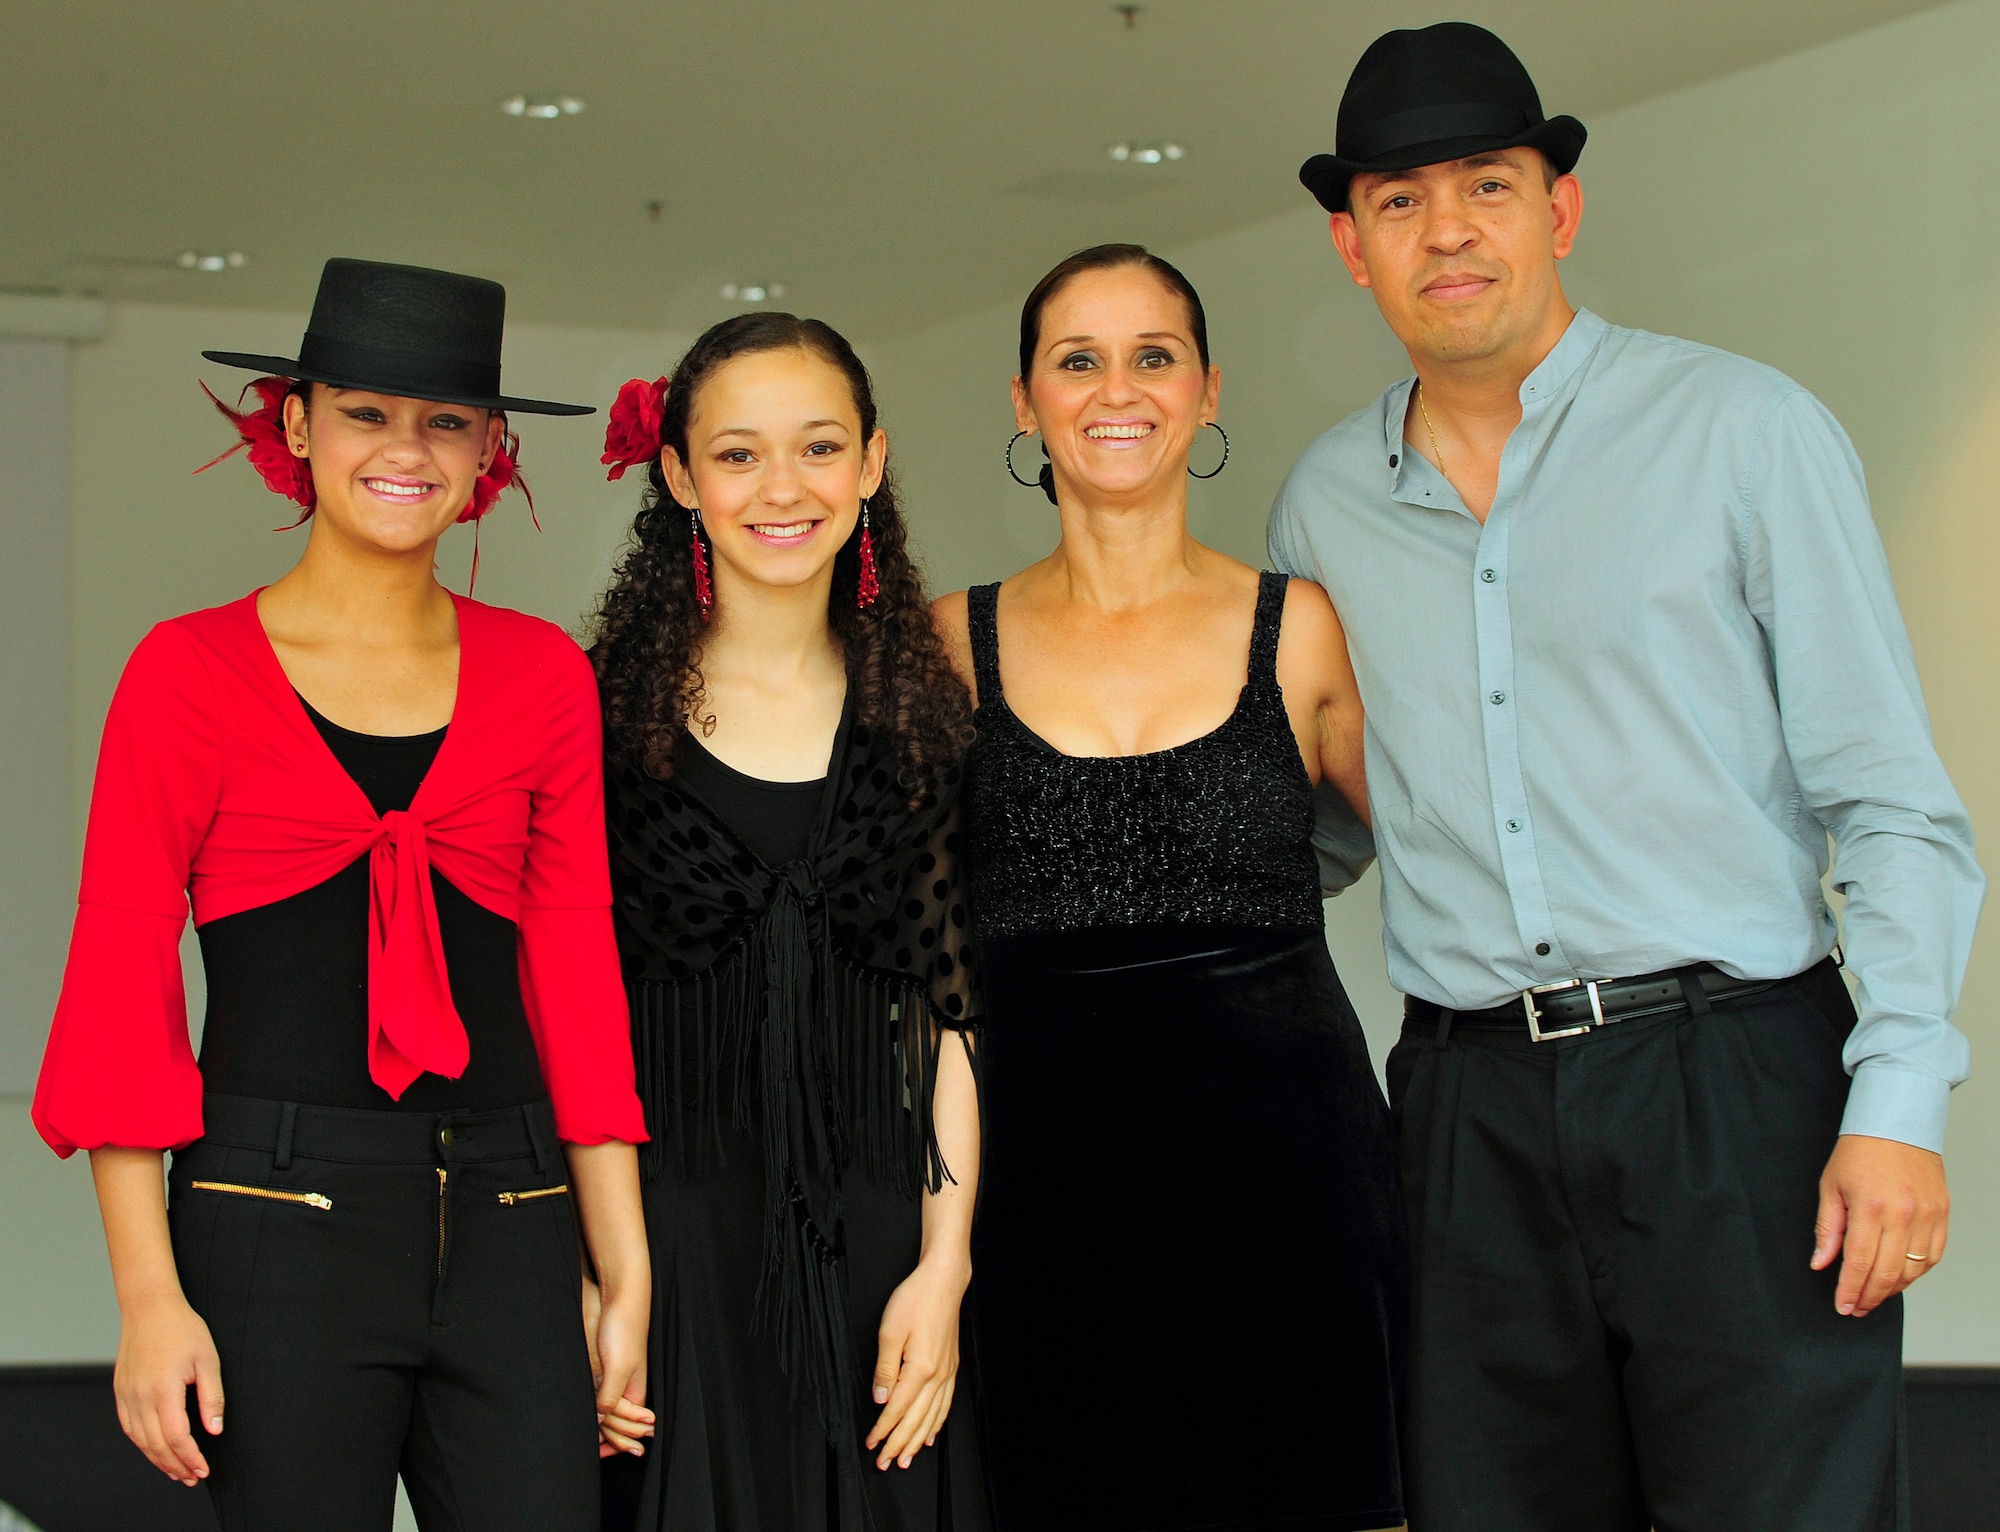 Kelsey Coral and Brianna Judith D'Jesus-Banos, along with Judith Banos-D'Jesus and U.S. Air Force Capt. Ricardo D'Jesus, 86th Medical Group, bioenvironmental engineer, pose for a family portrait after all performing Flamenco, Salsa and Merengue dances during the Hispanic Heritage month kickoff event held at the Kaiserslautern Military Community Center, Ramstein Air Base, Germany, Sept. 18. Both daughters have been performing Jazz, Ballet, Tap and Flamenco for over four years. Capt. and Mrs. D'Jesus, have been performing Salsa and Merengue since the age of twelve. Hispanic Heritage month events celebrate heritage, diversity, integrity and honor and take place from Sept. 15 through Oct. 15 this year. (U.S. Air Force photo by Staff Sgt. Stephen J. Otero)